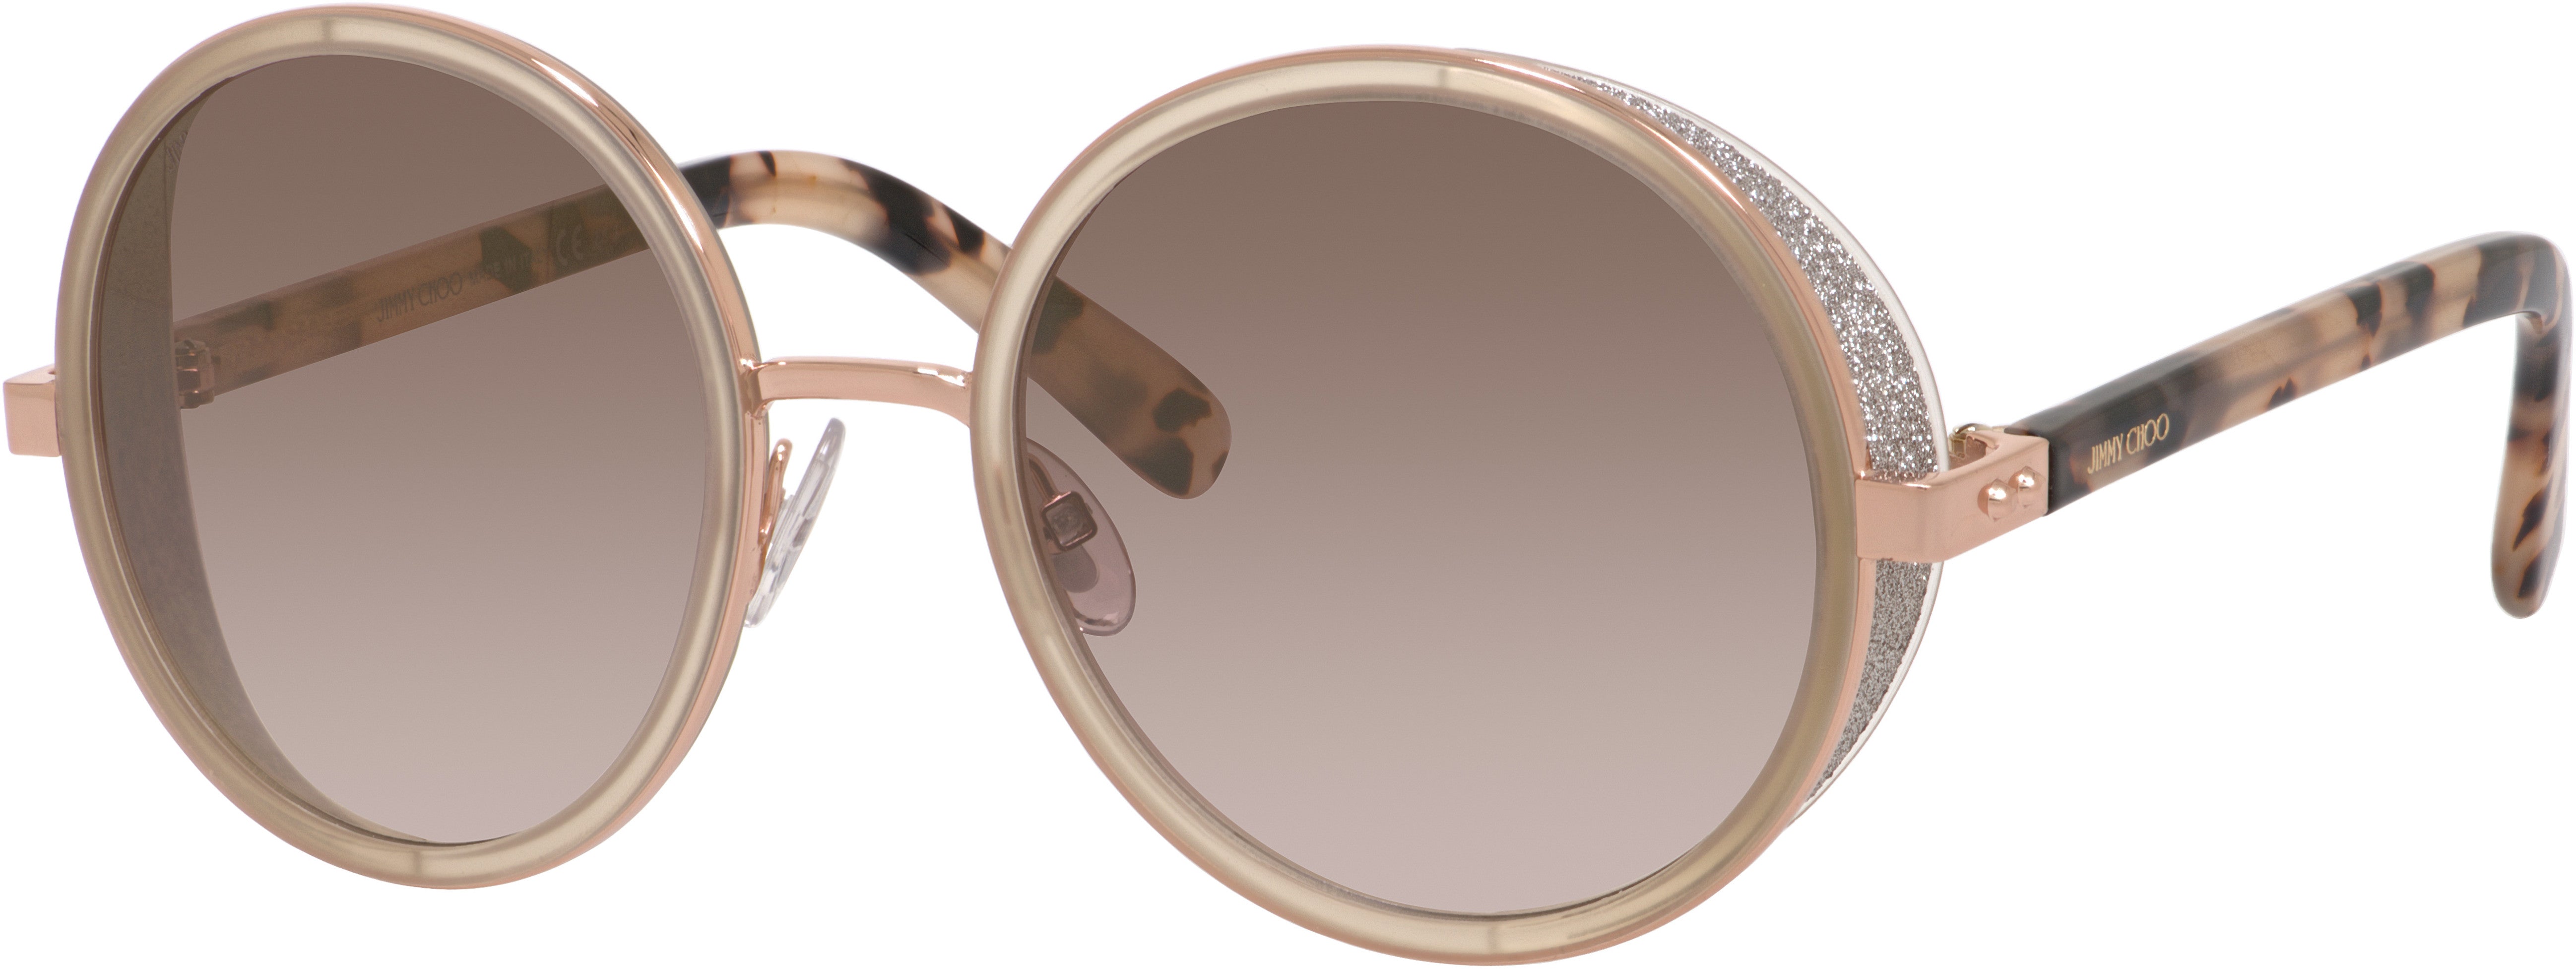 Jimmy Choo Andie/S Oval Modified Sunglasses 0J7A-0J7A  Gold Copper (NH Brown Mirror Gold)